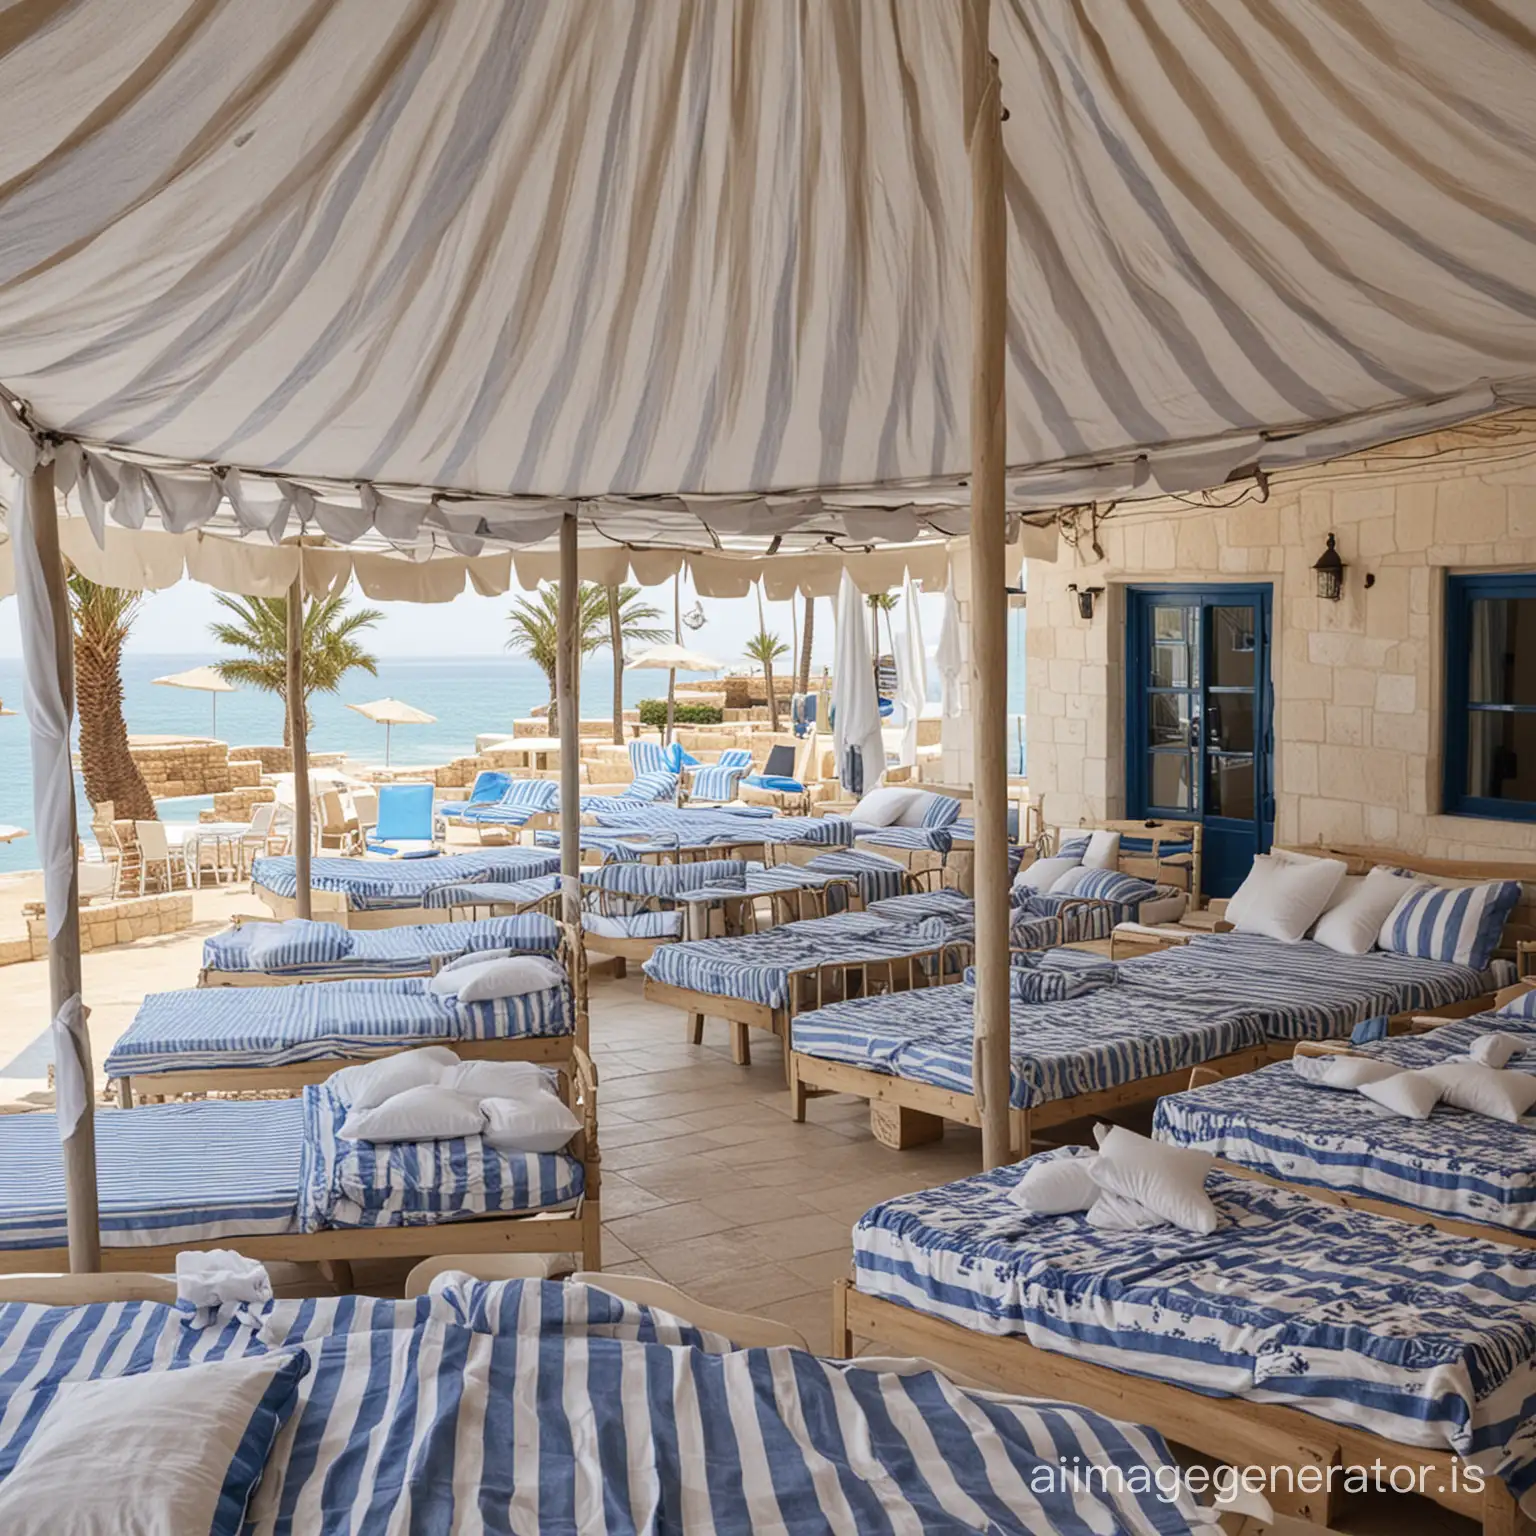 
I want Batroun Village club in batroun Lebanon, with the mood of blue and white stripped beds and parasols
